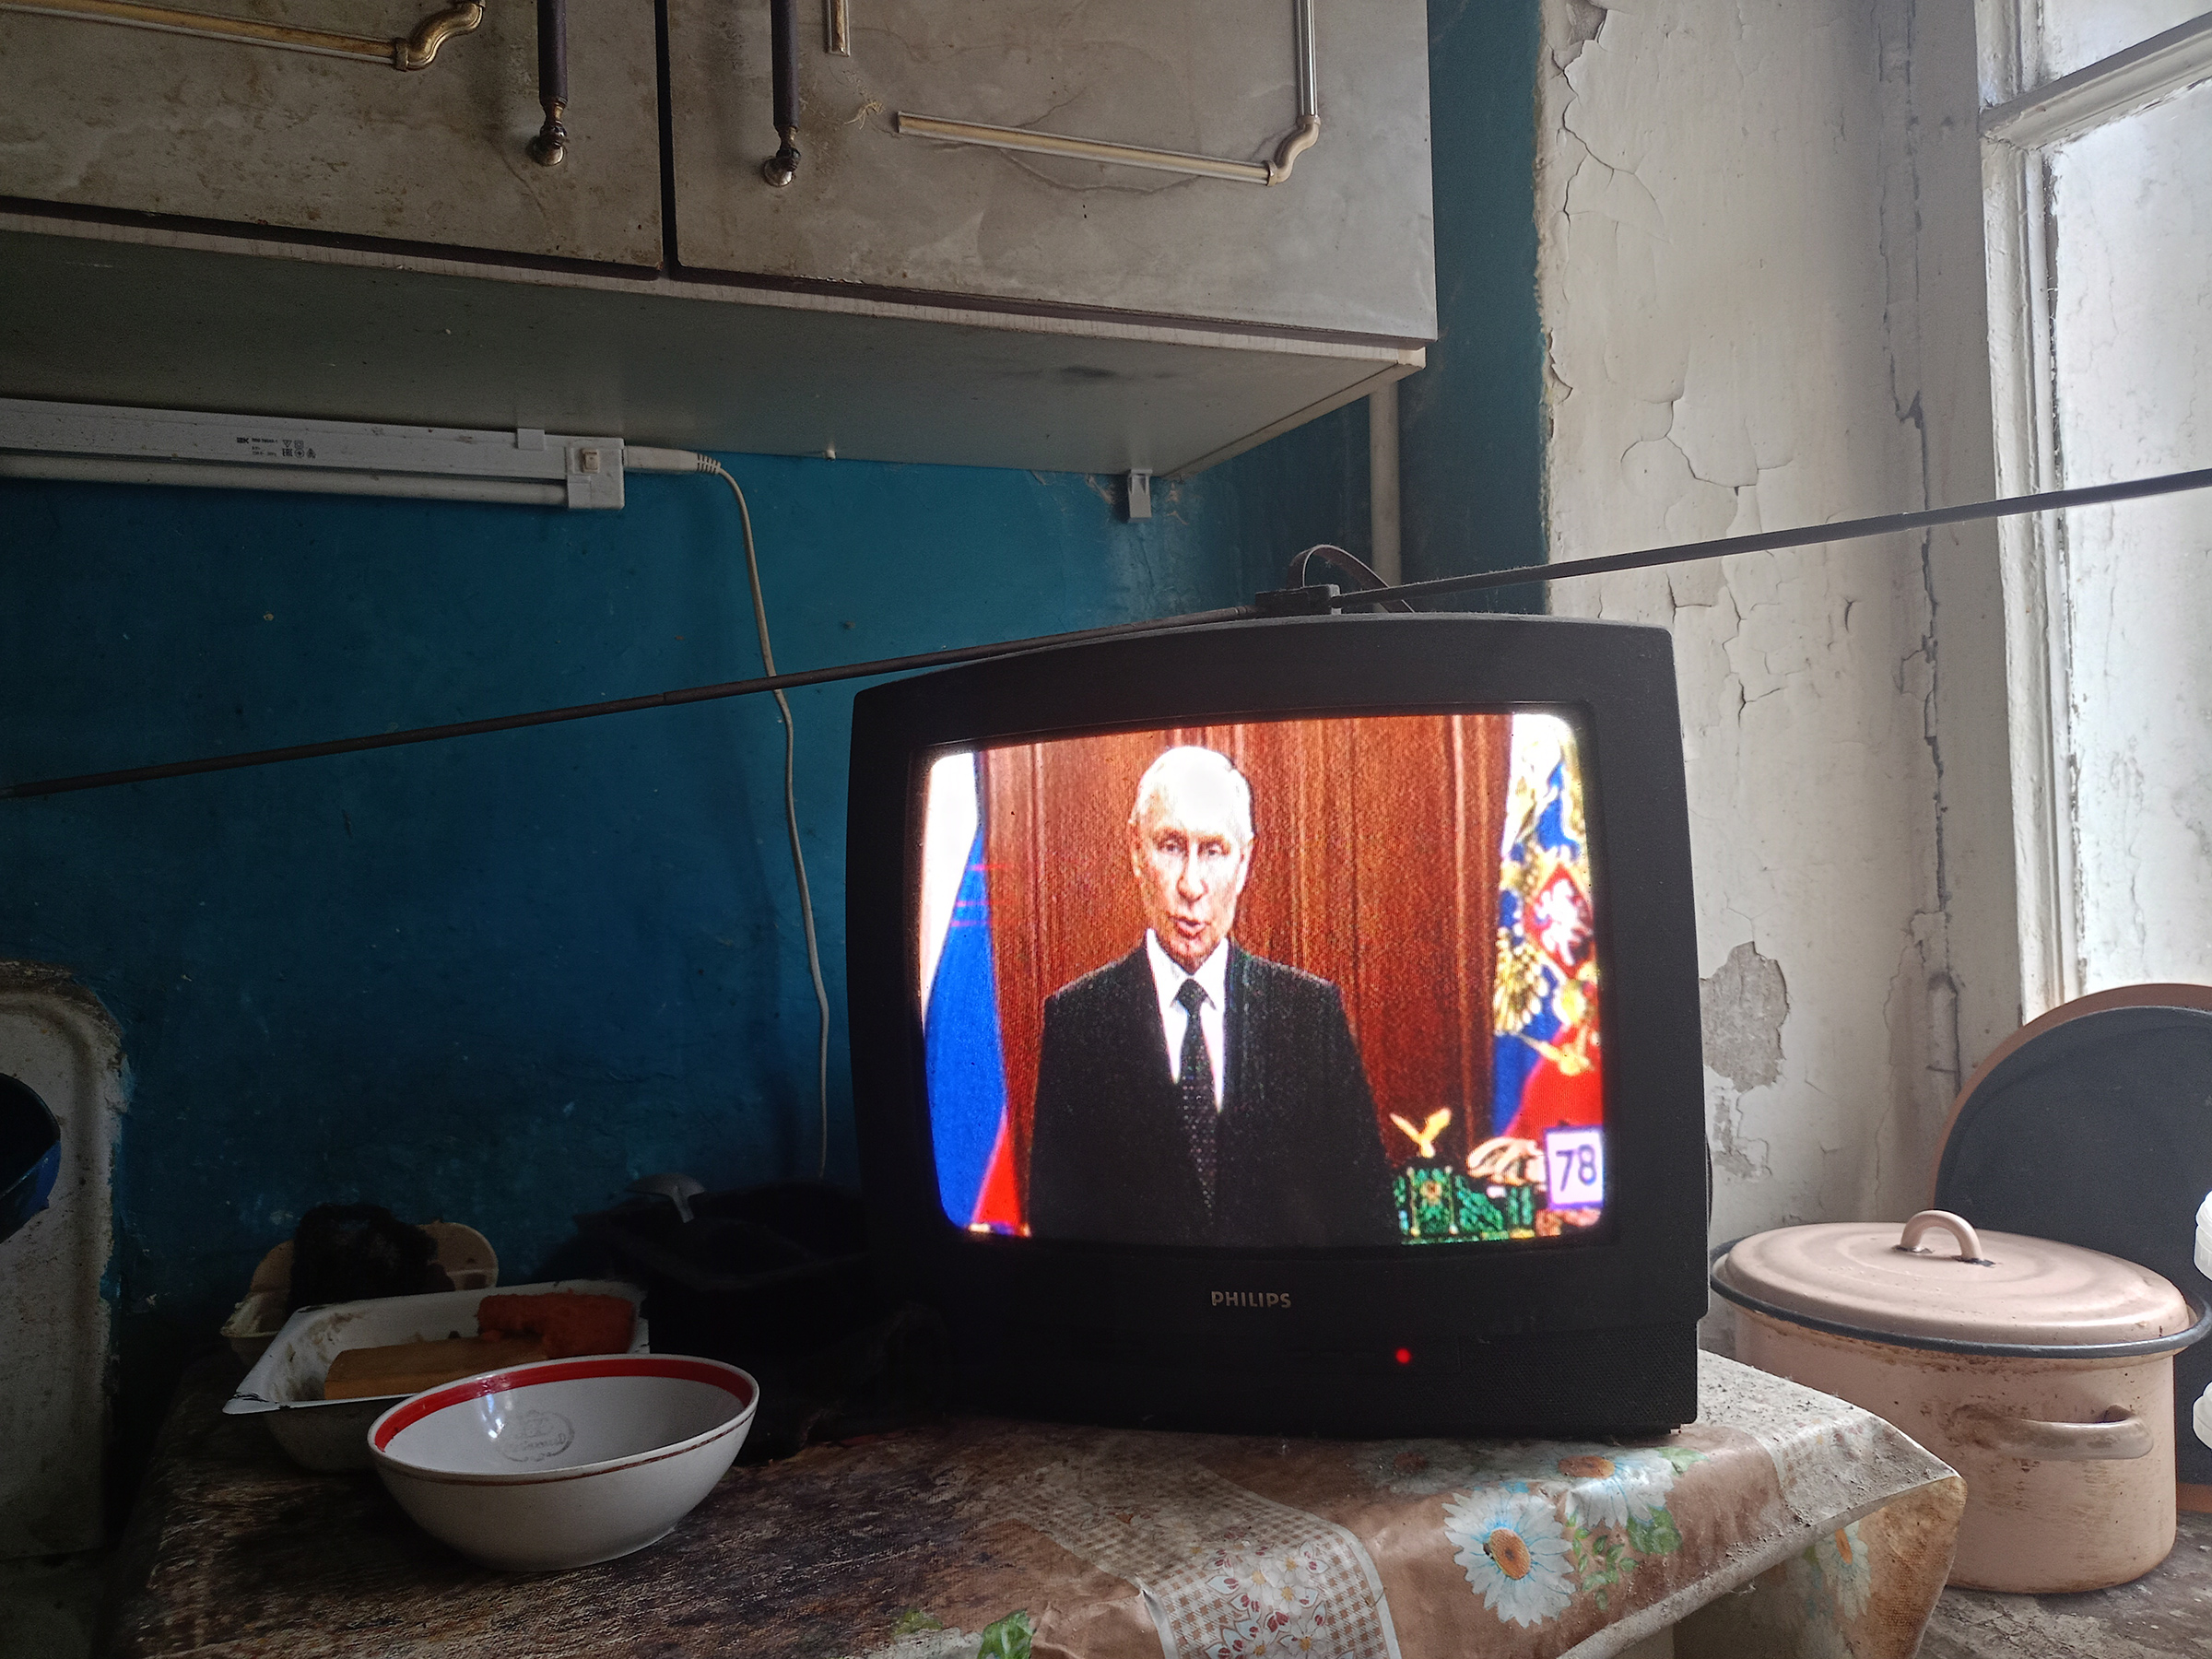 Russian President Vladimir Putin's appeal to the citizens of Russia, personnel of the Armed Forces of the Russian Federation and law enforcement officers in connection with the situation with PMC Wagner as shown on television in St. Petersburg on June 24. (Artem Priakhin—SOPA Images/LightRocket/Getty Images)